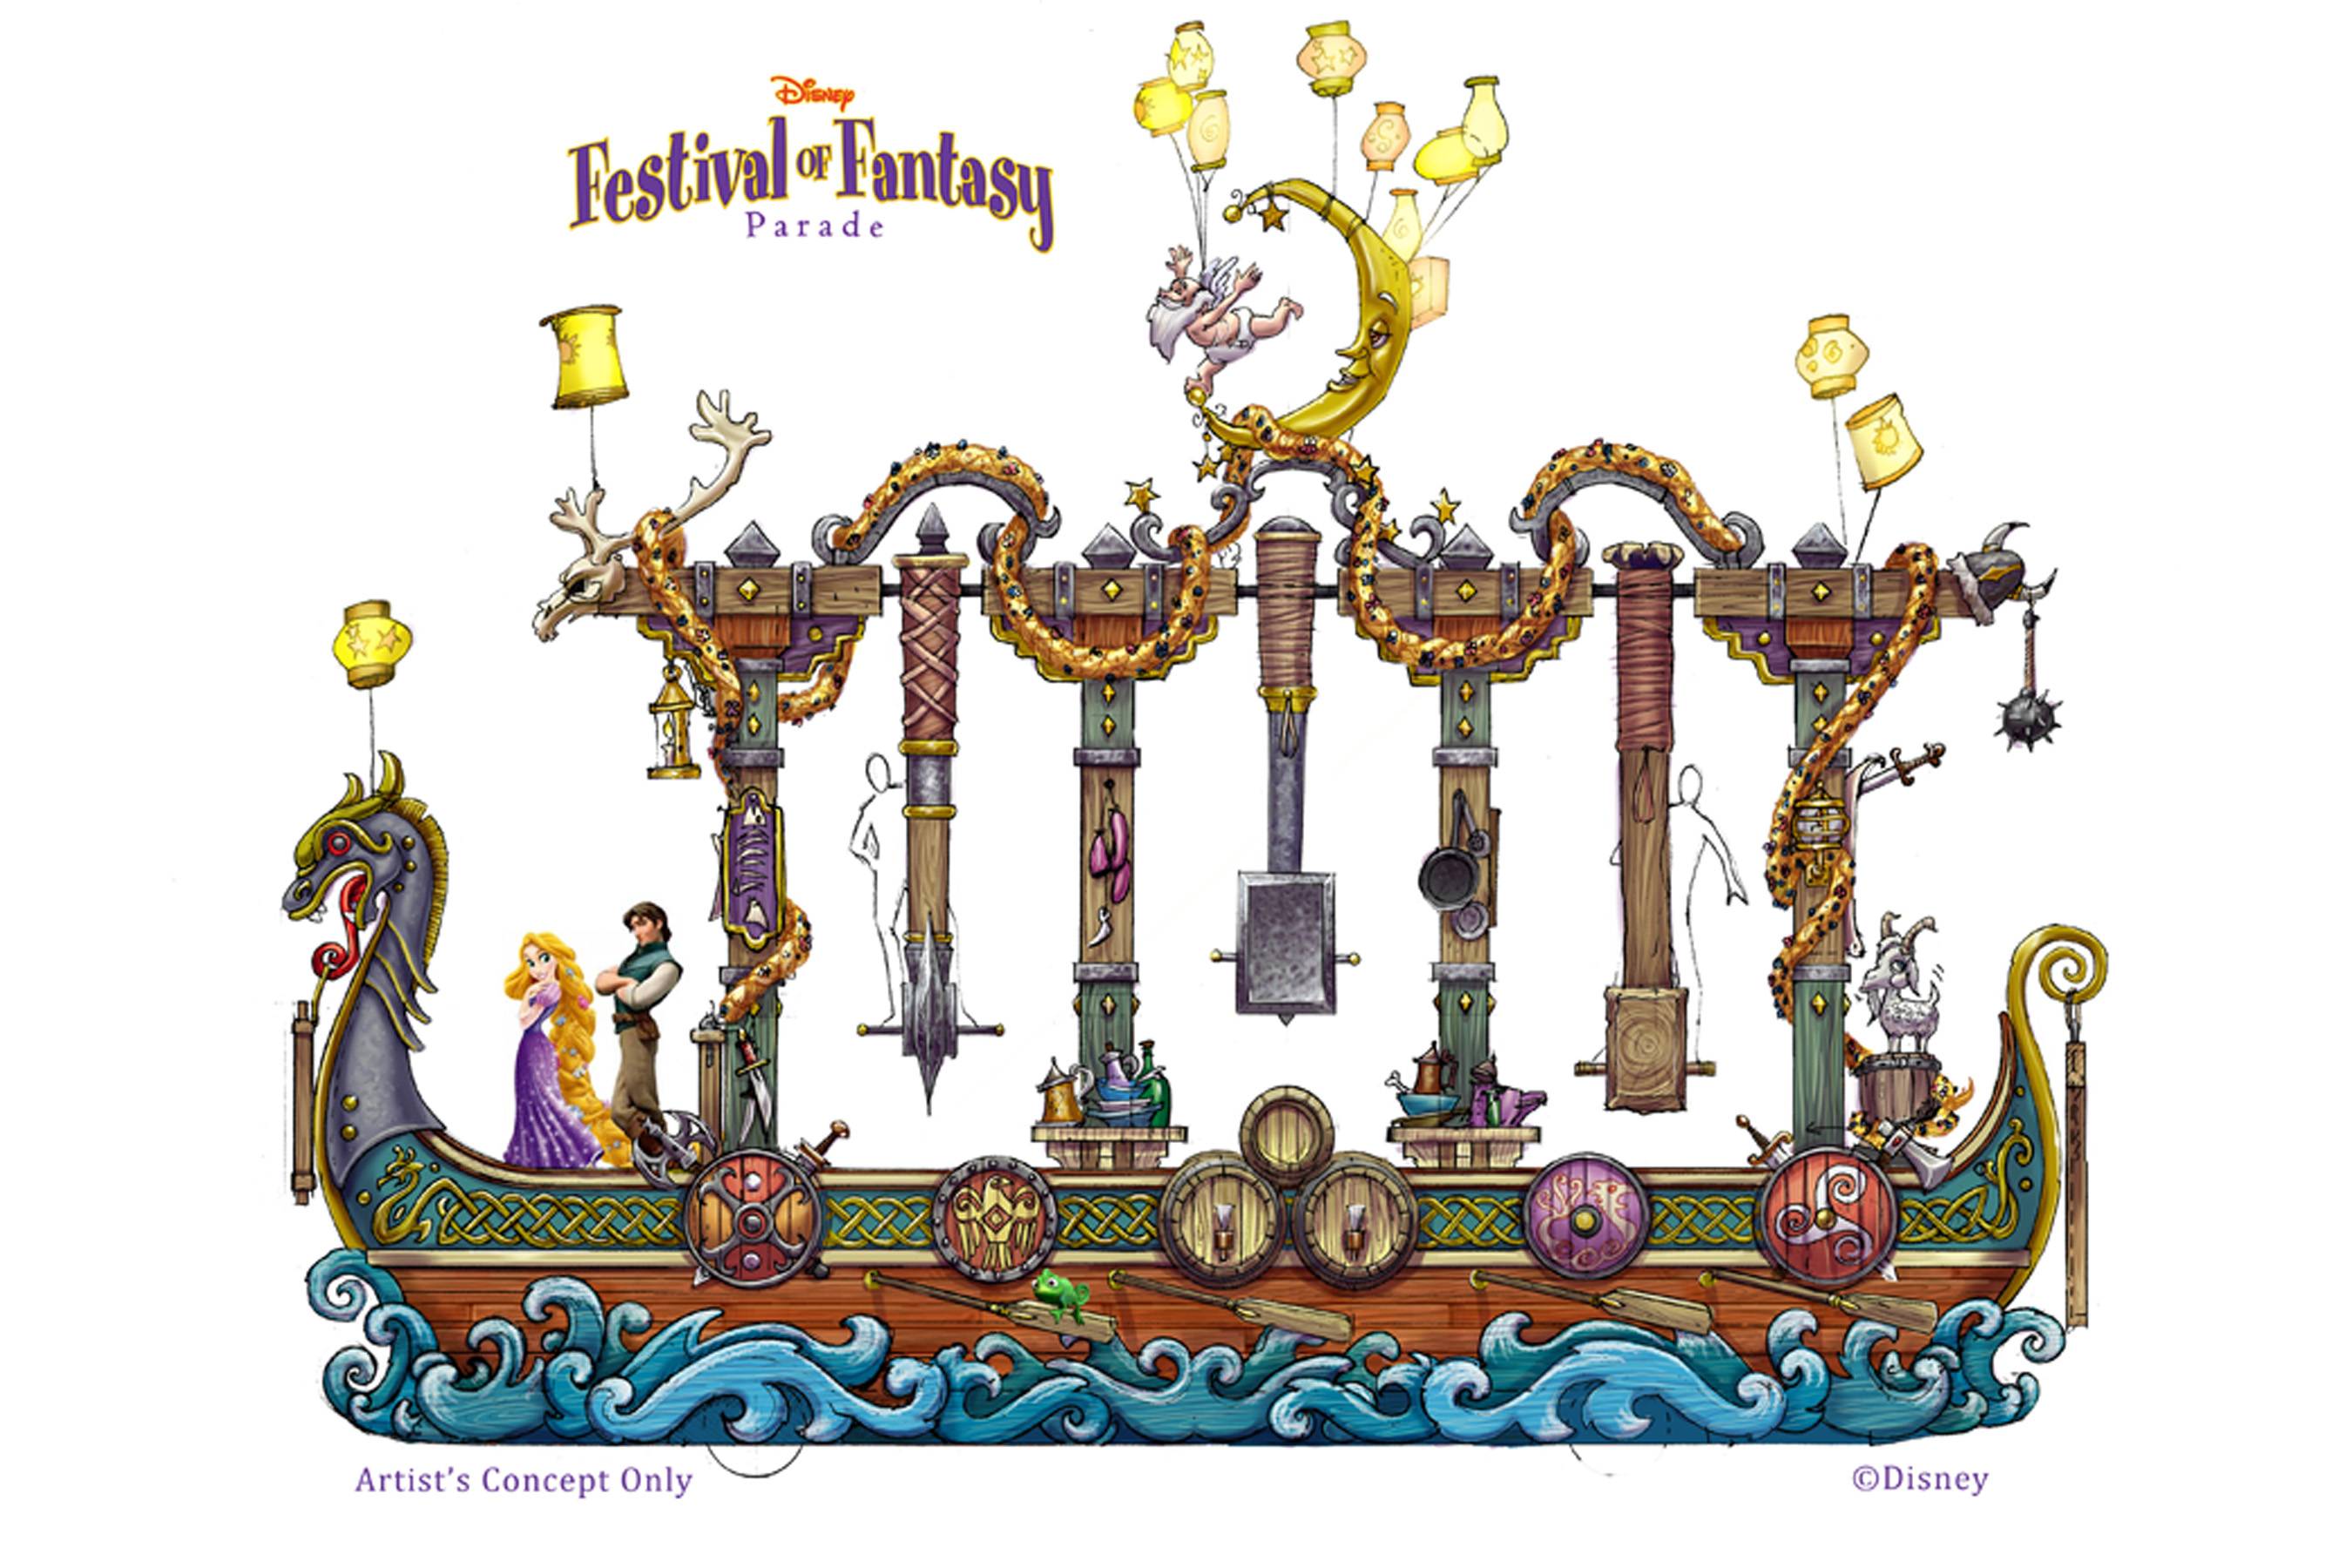 Festival of Fantasy Parade coming to the Magic Kingdom in Spring 2014